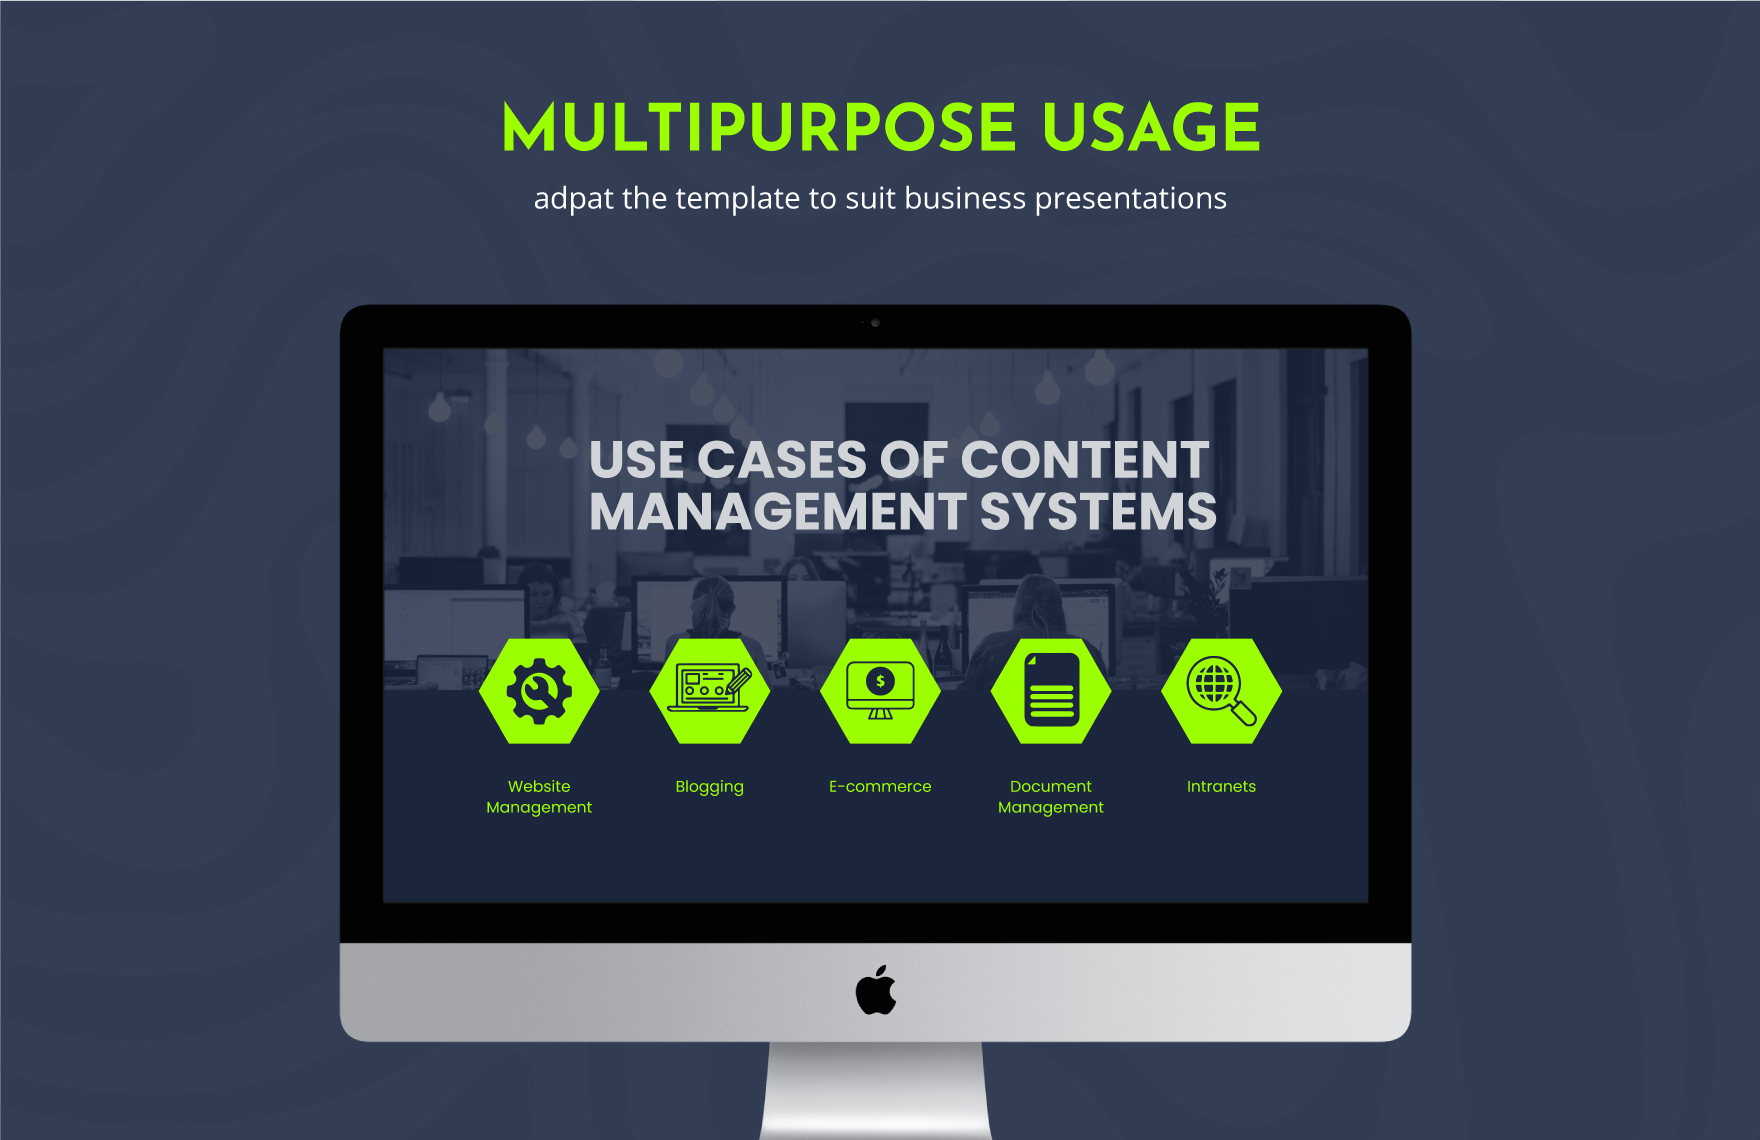 IT Content Management Systems (CMS) Consulting Business Presentation Template